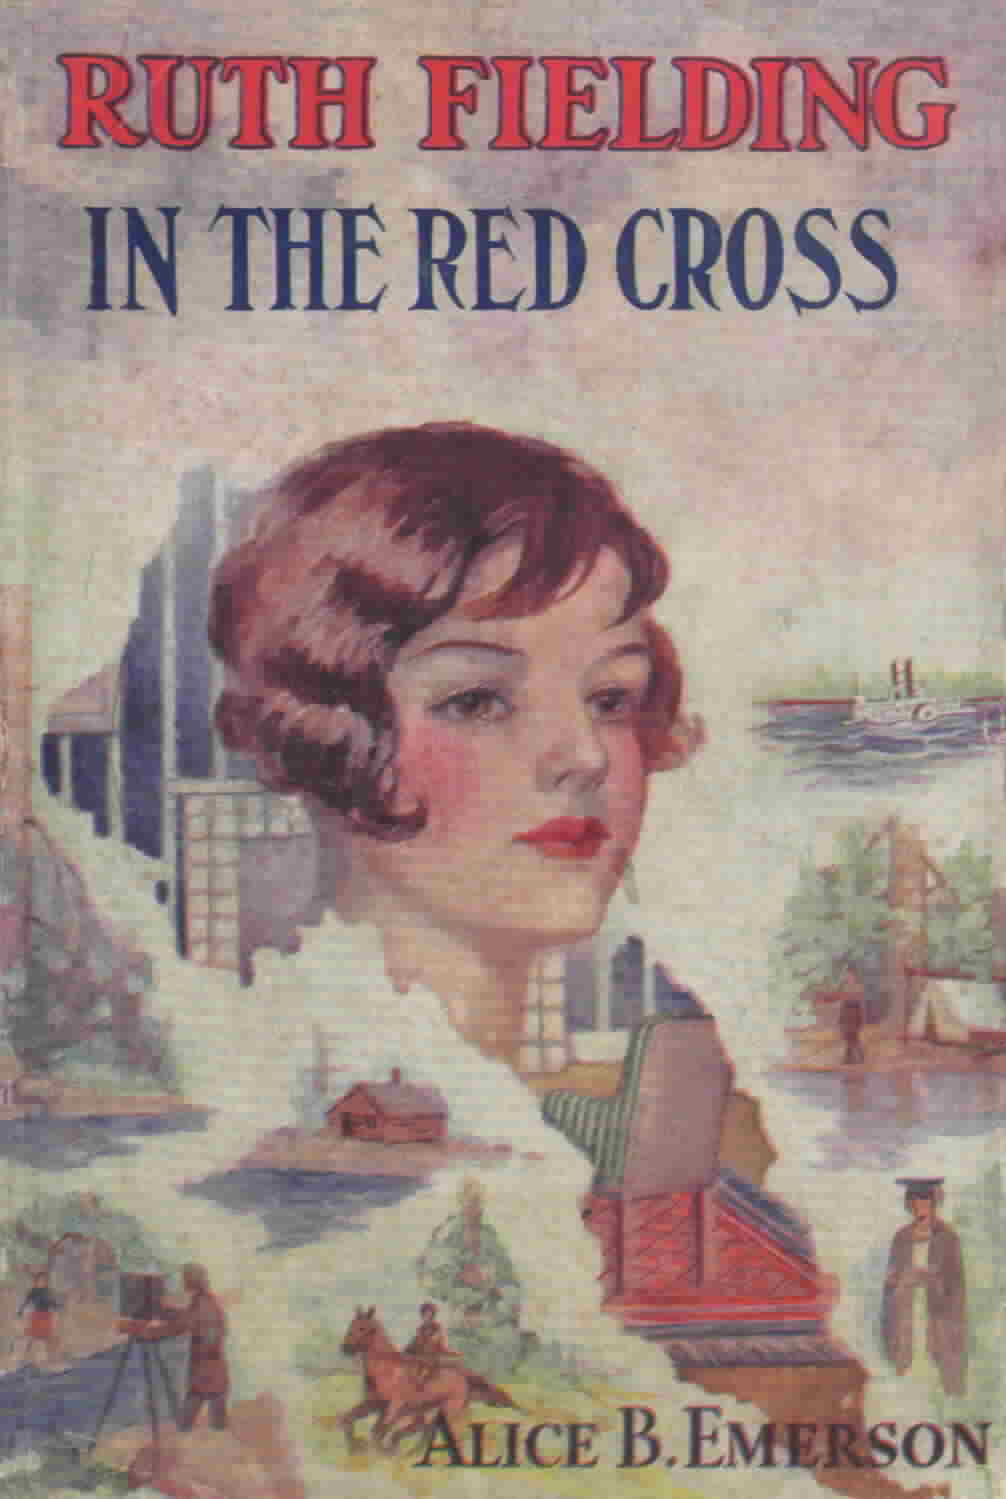 13. Ruth Fielding in the Red Cross